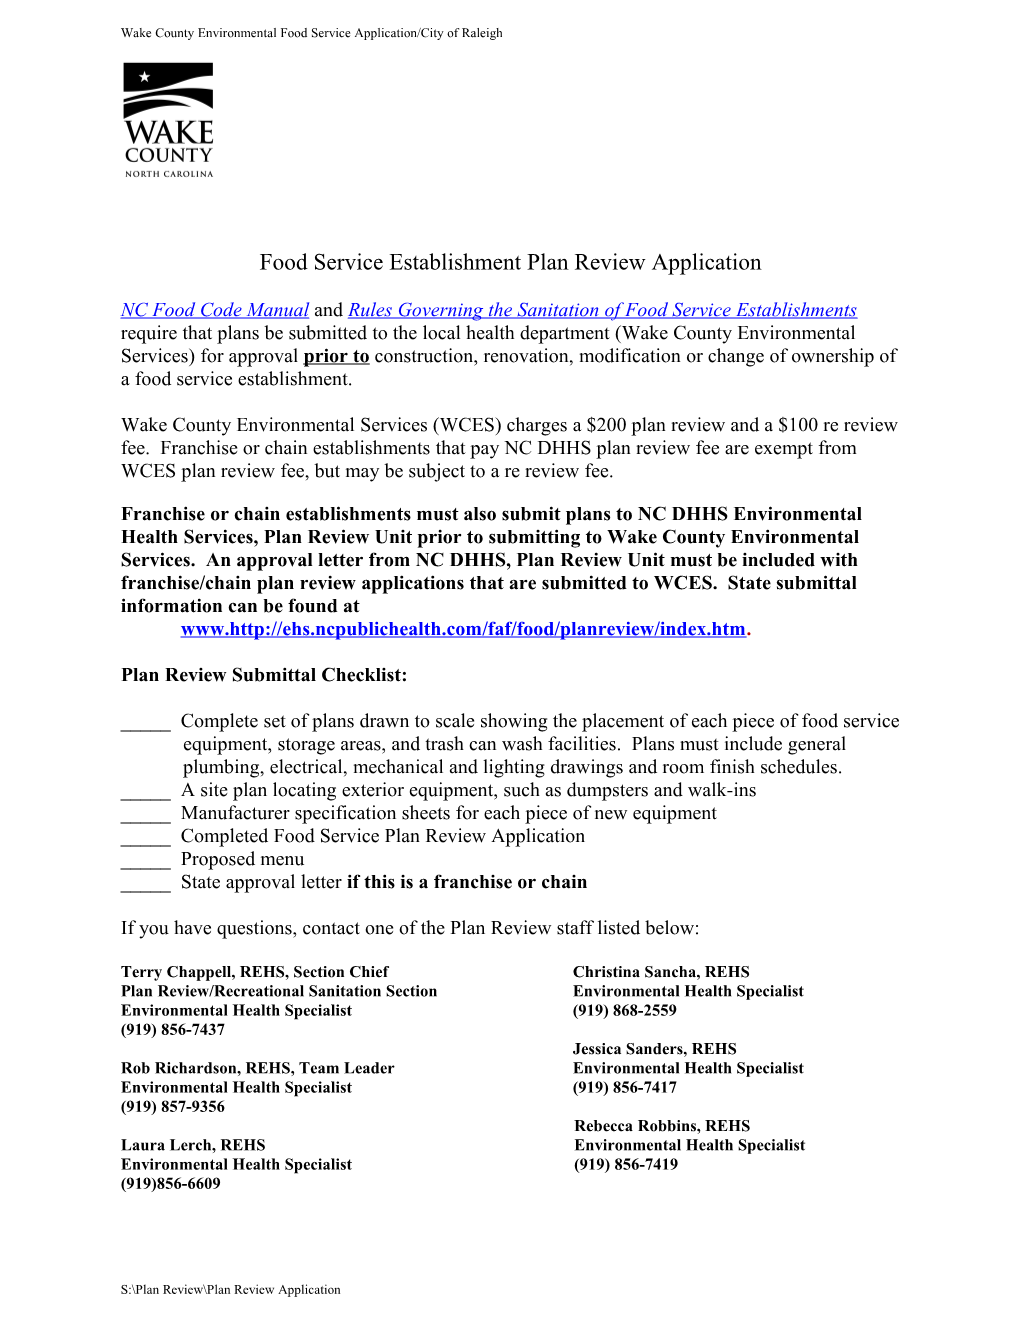 Wake County Environmental Food Service Plan Review Application/City of Raleigh